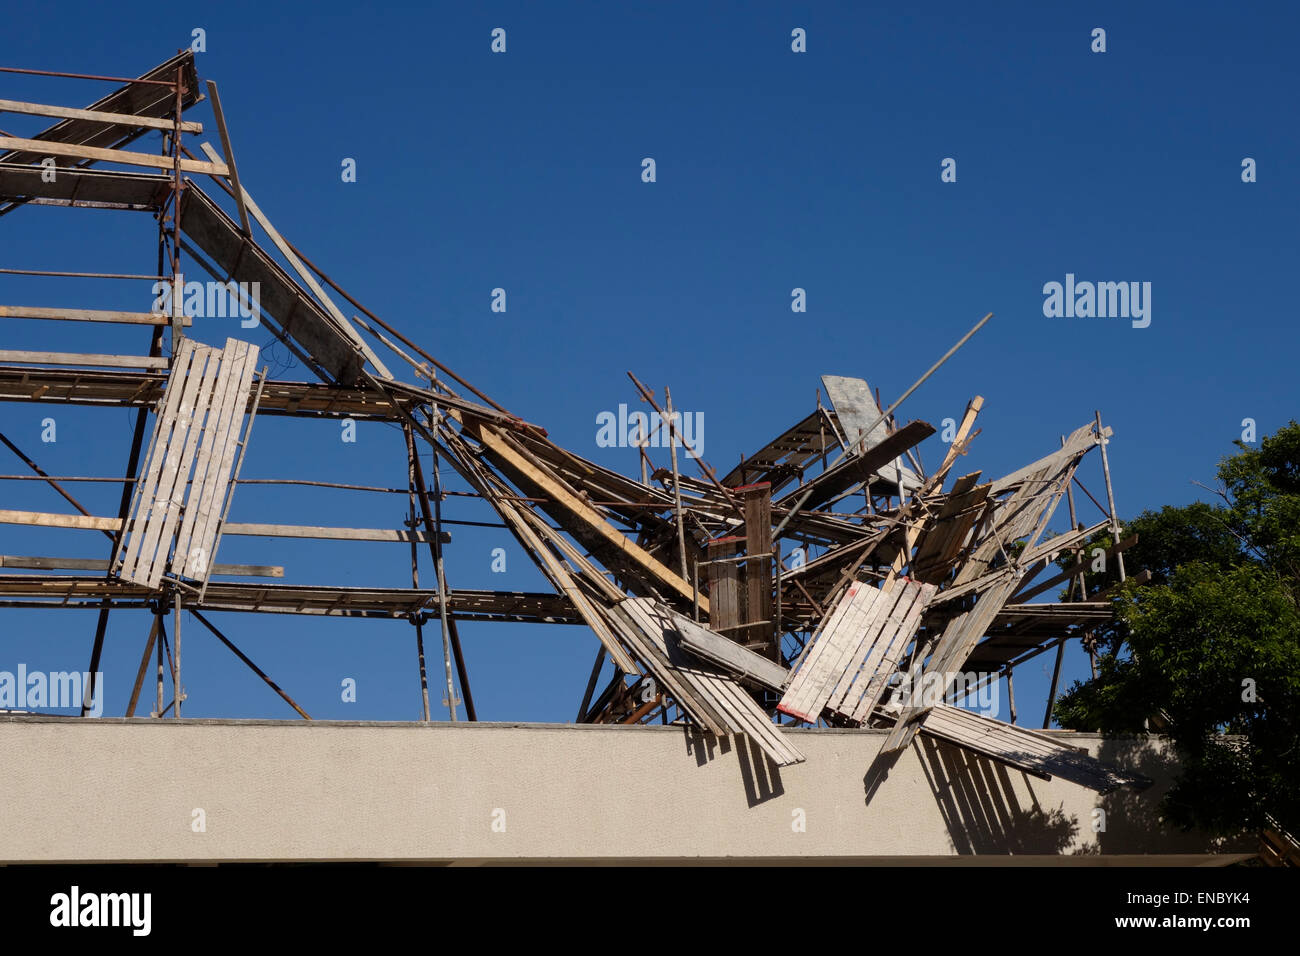 An art installation depicting a collapsed scaffolding entitled “stalagmite” by Israeli artist Shai Ratner placed over Helena Rubinstein Pavilion for Contemporary Art in Tel Aviv Israel Stock Photo